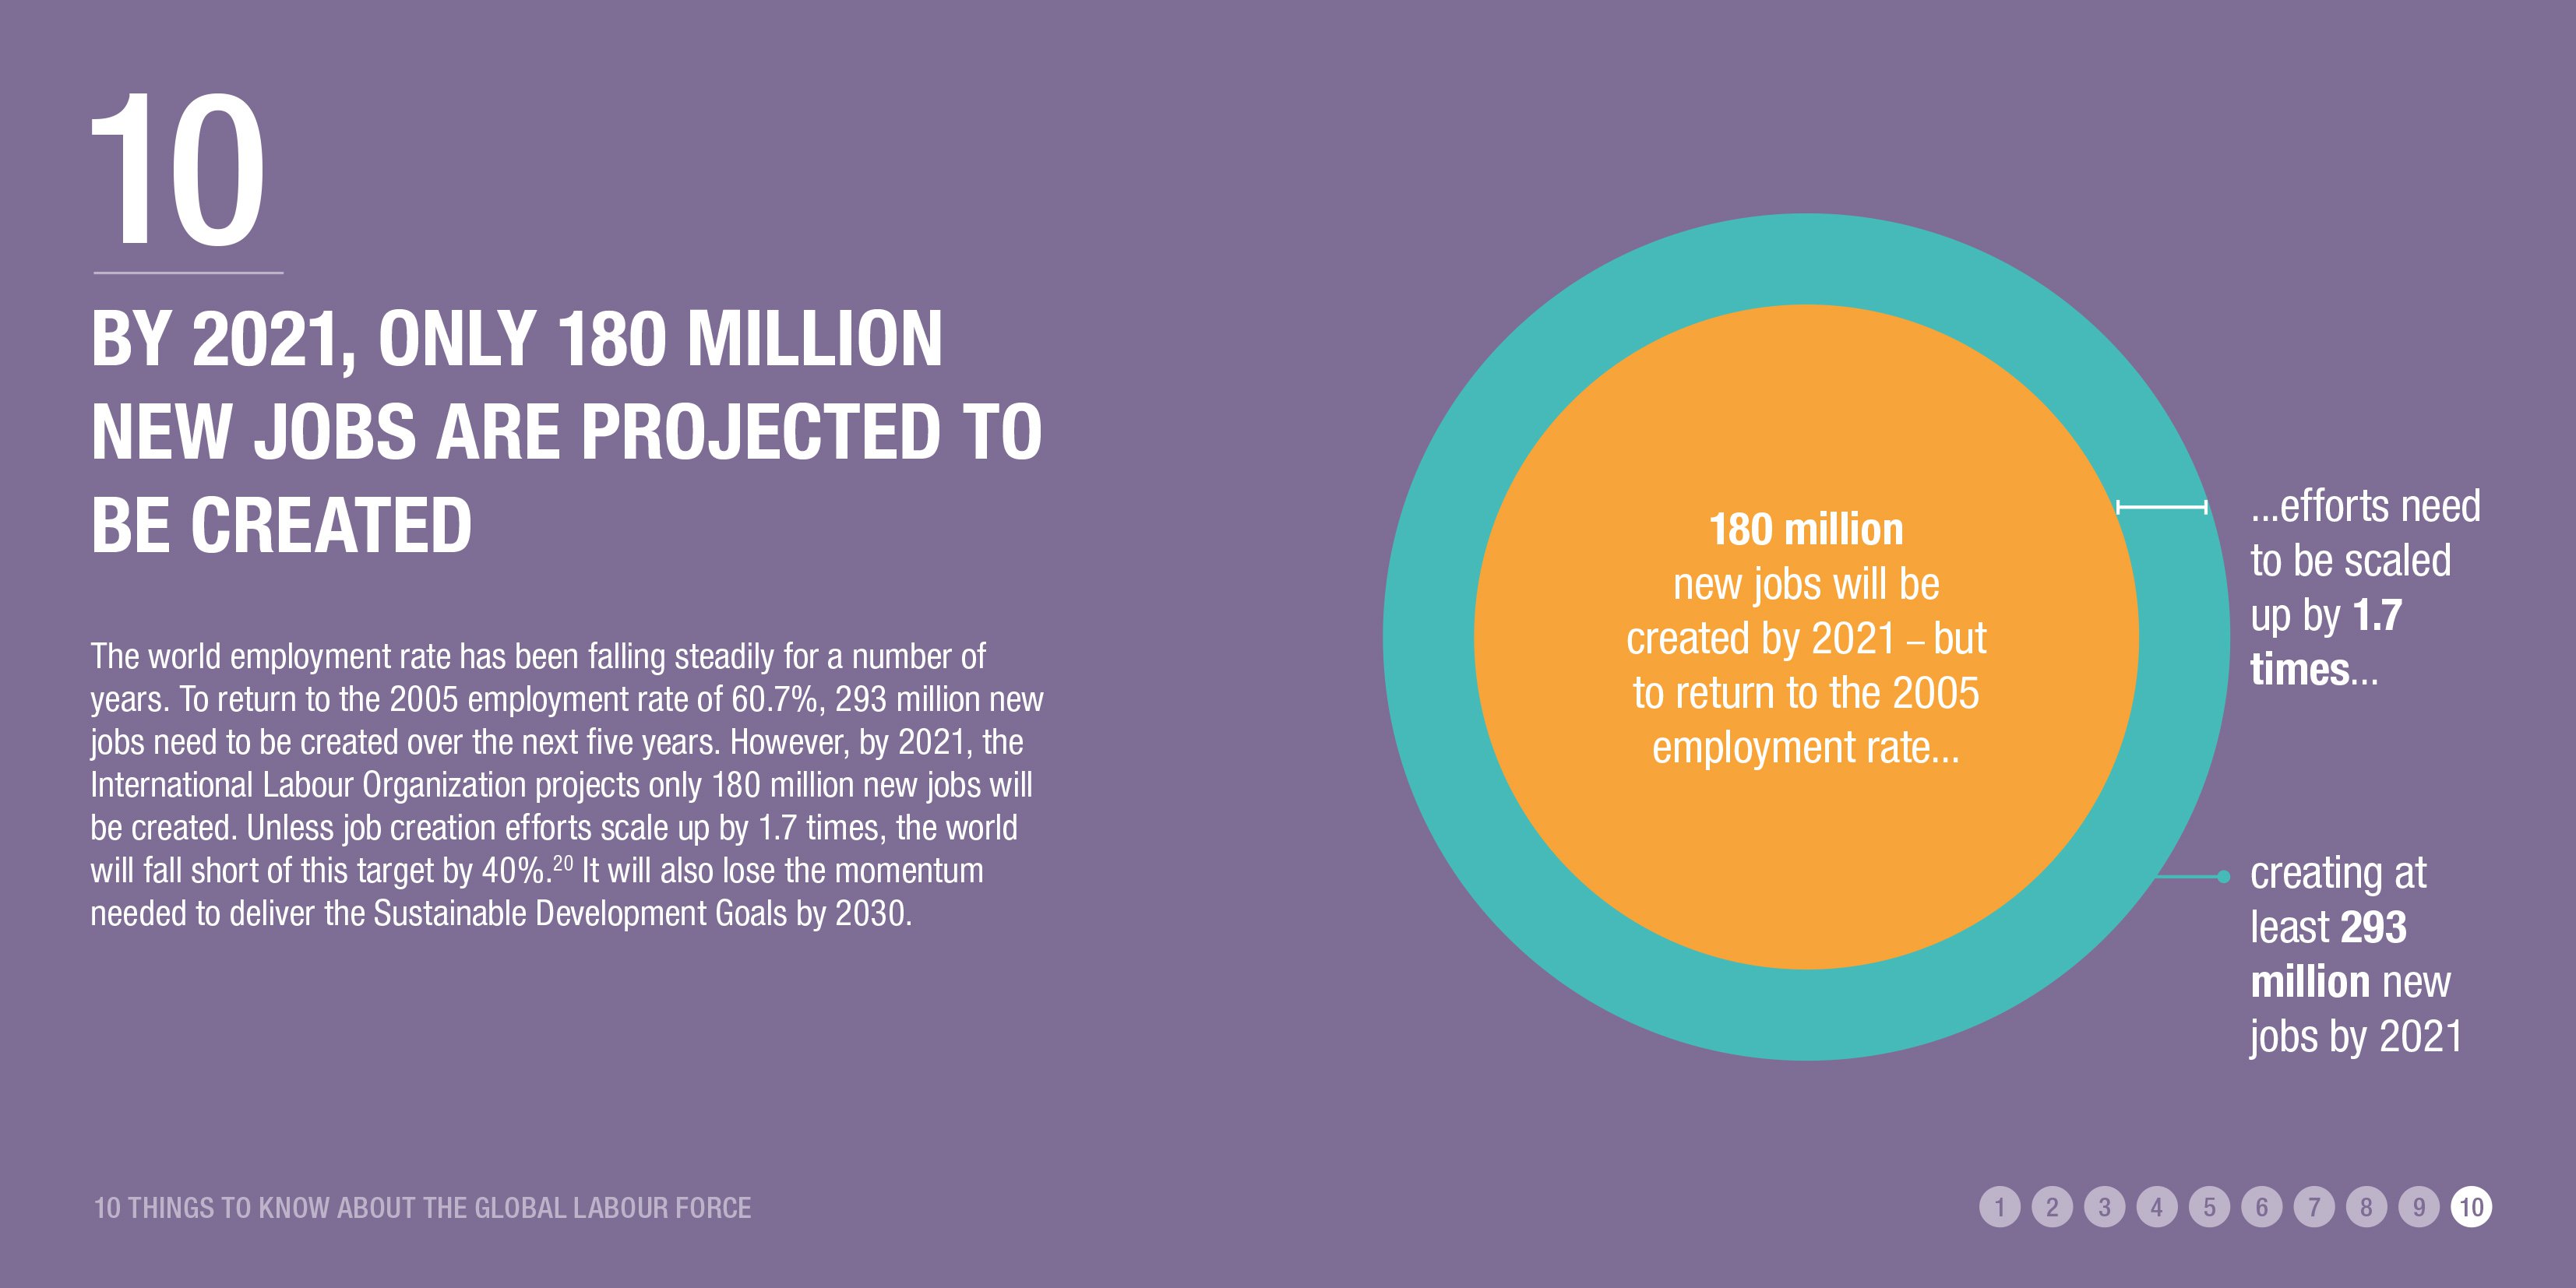 By 2021, only 180 million new jobs are projected to be created